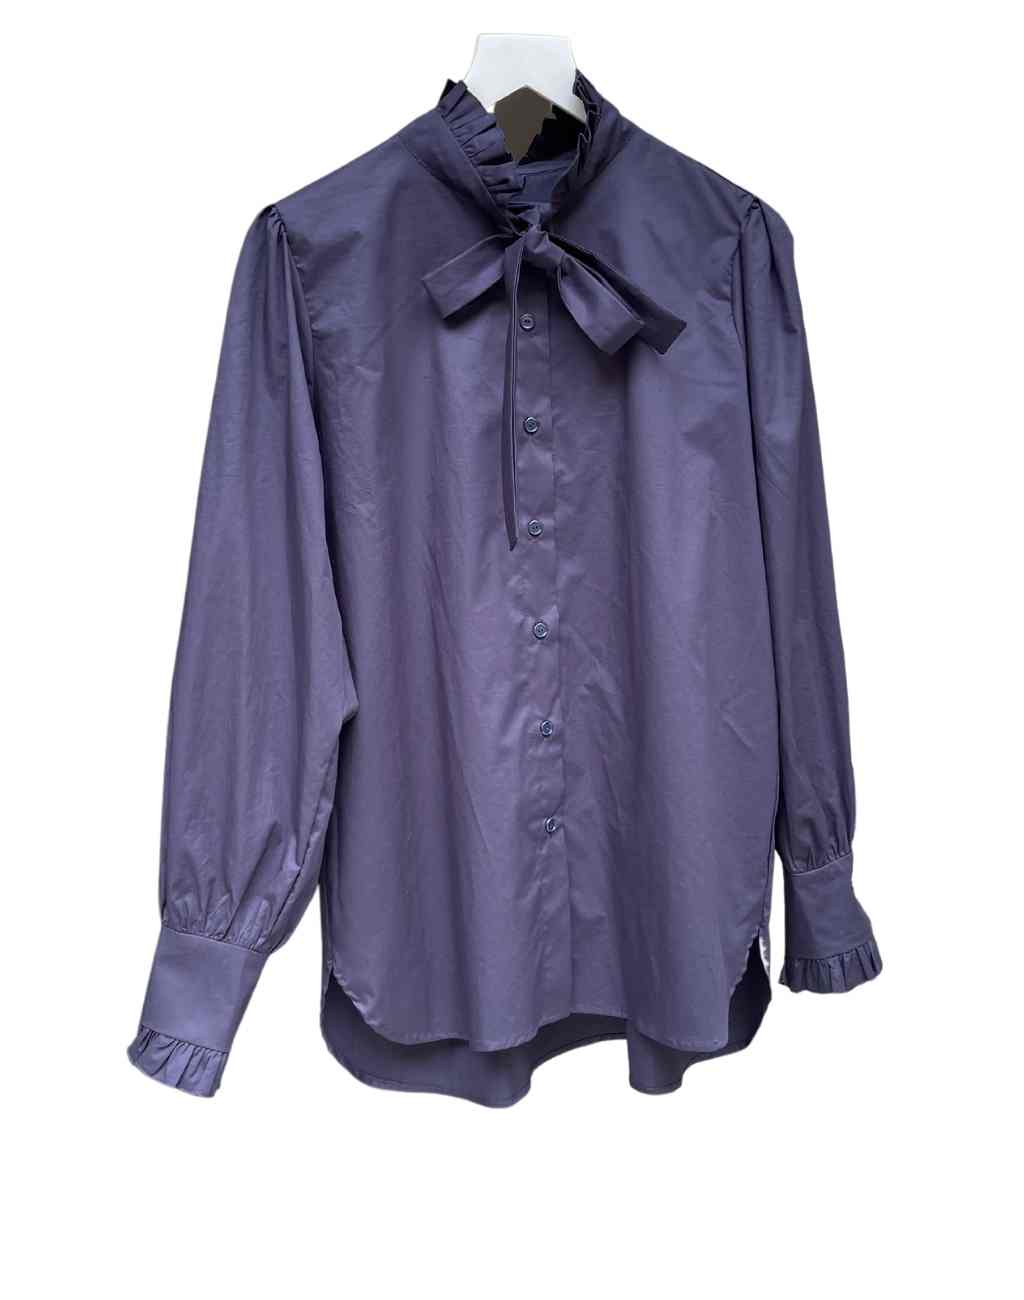 Classic Navy Diane Blouse with Tie and Ruffle at Neck | Long Sleeves with Ruffled Cuff